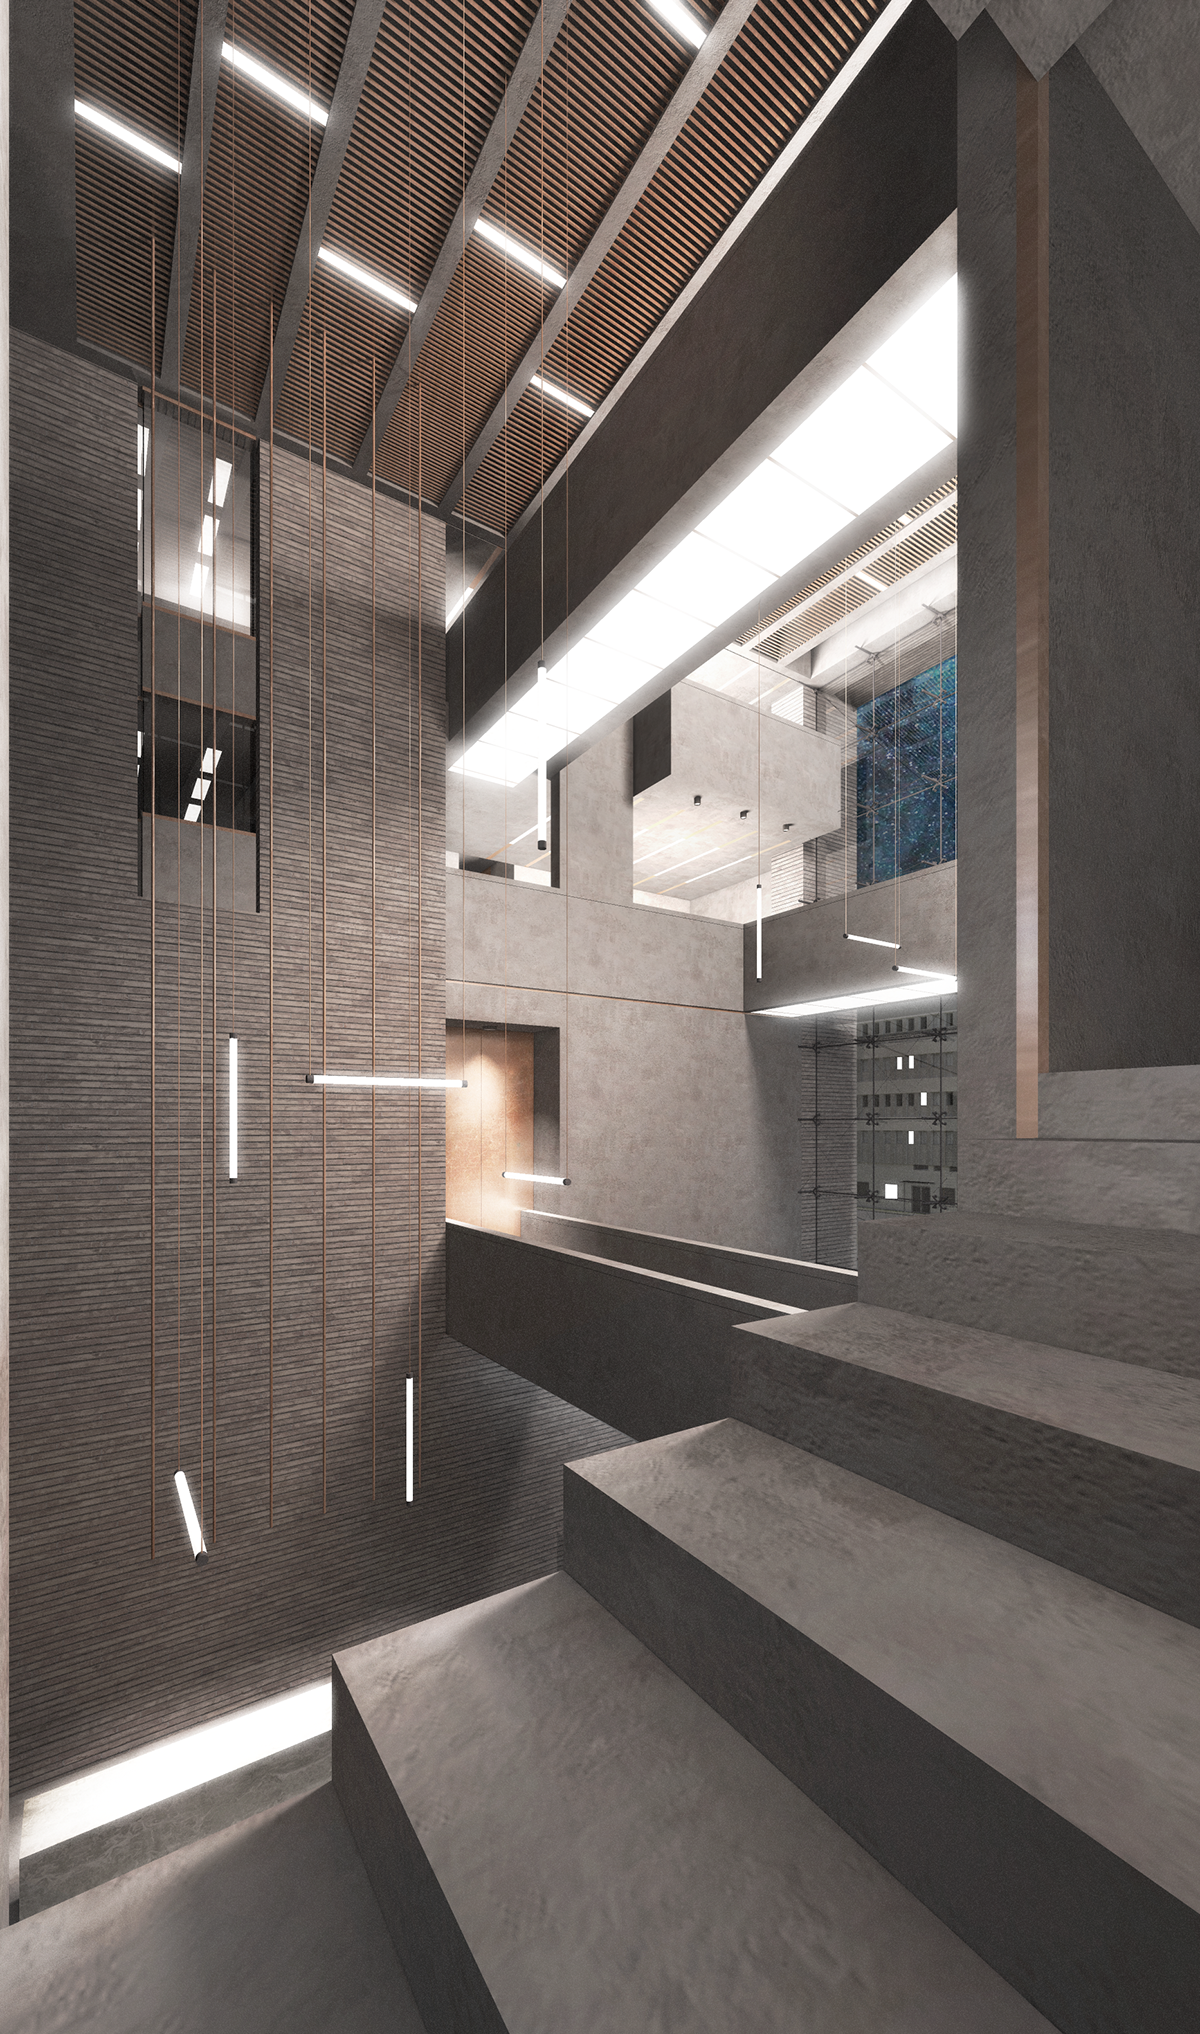 architecture rendering visualisation Competition post effect